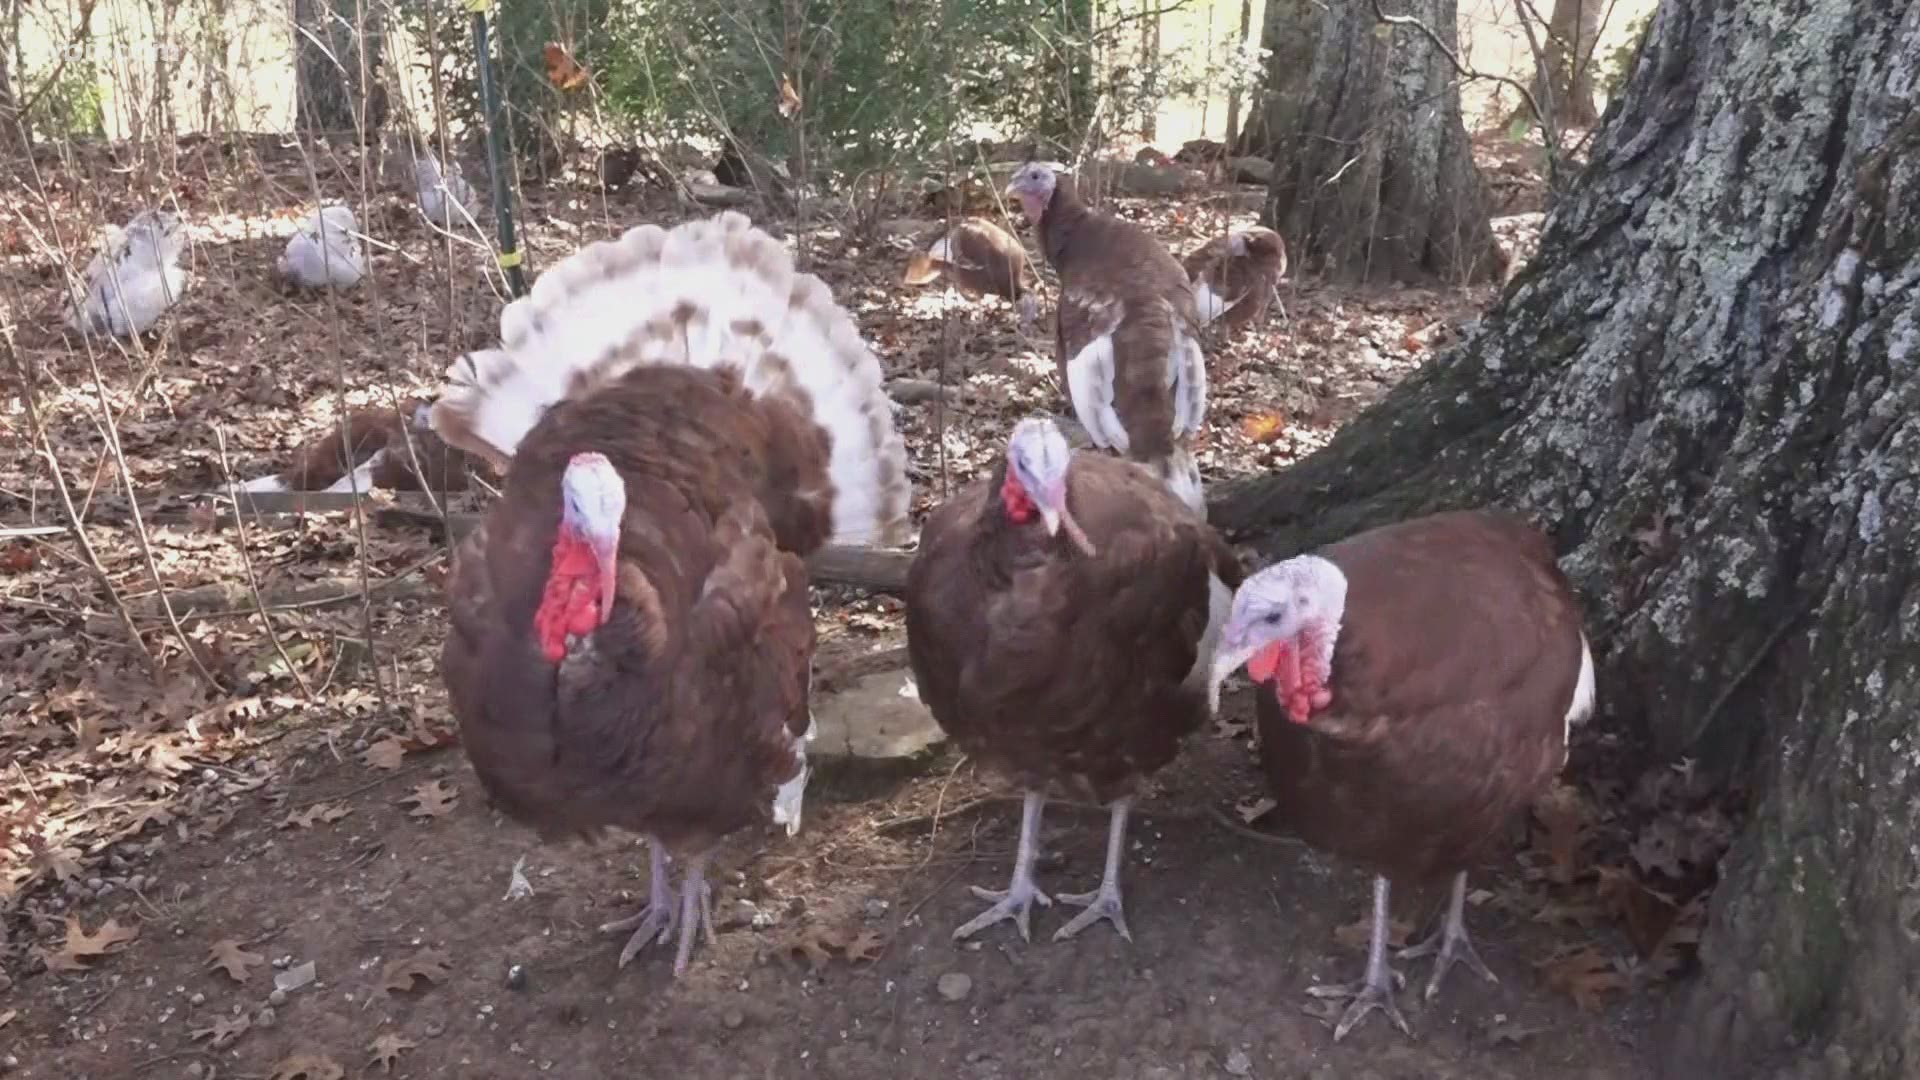 Ranch owner and veterinarian, Kelly Mayfield said that the niche market is people looking for free-range, ethically raised small thanksgiving turkeys.